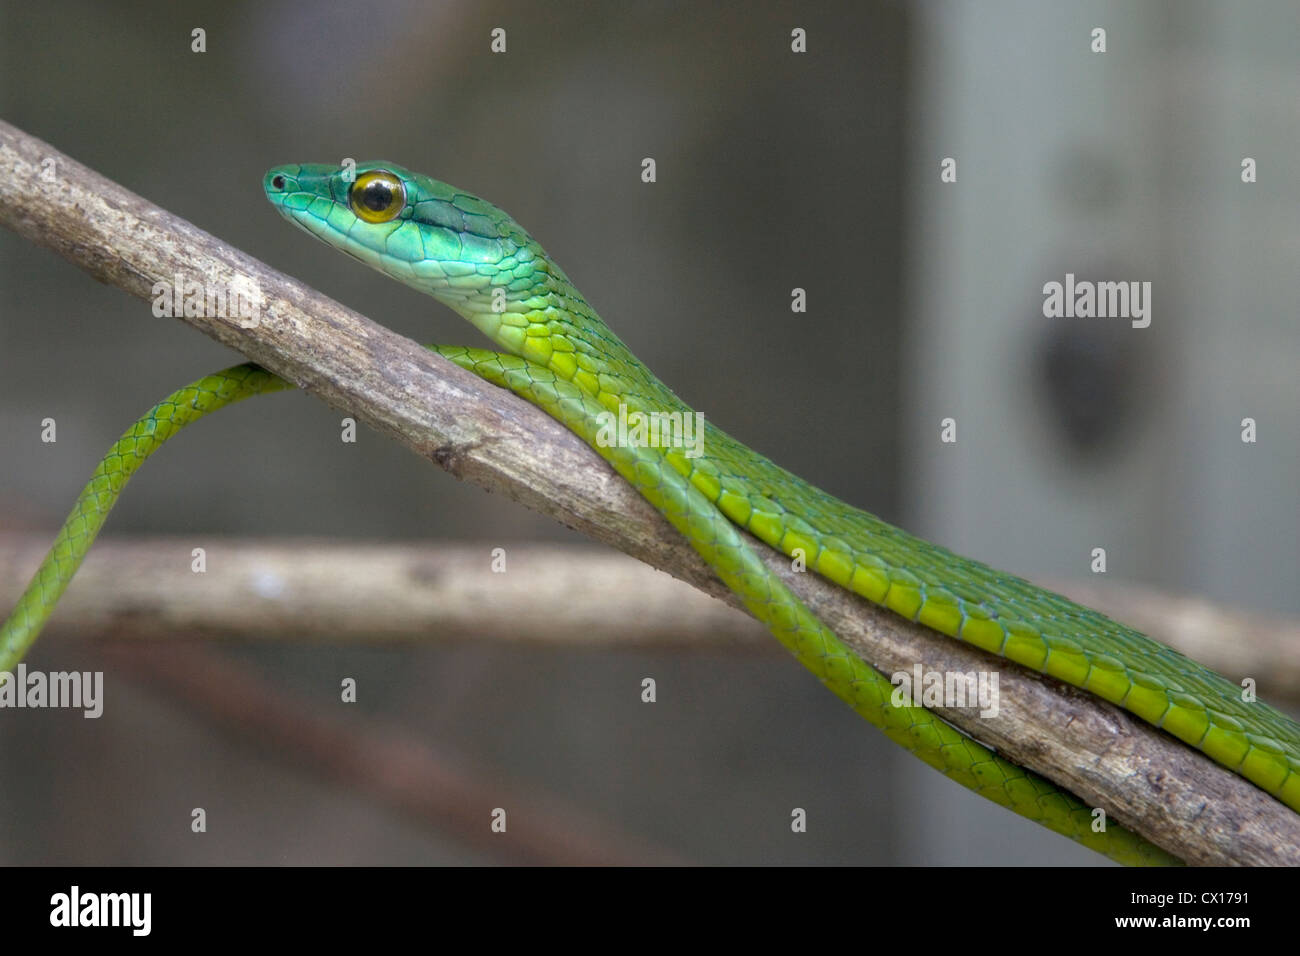 Green Tree Snake waiting on a branch, Costa Rica. Stock Photo